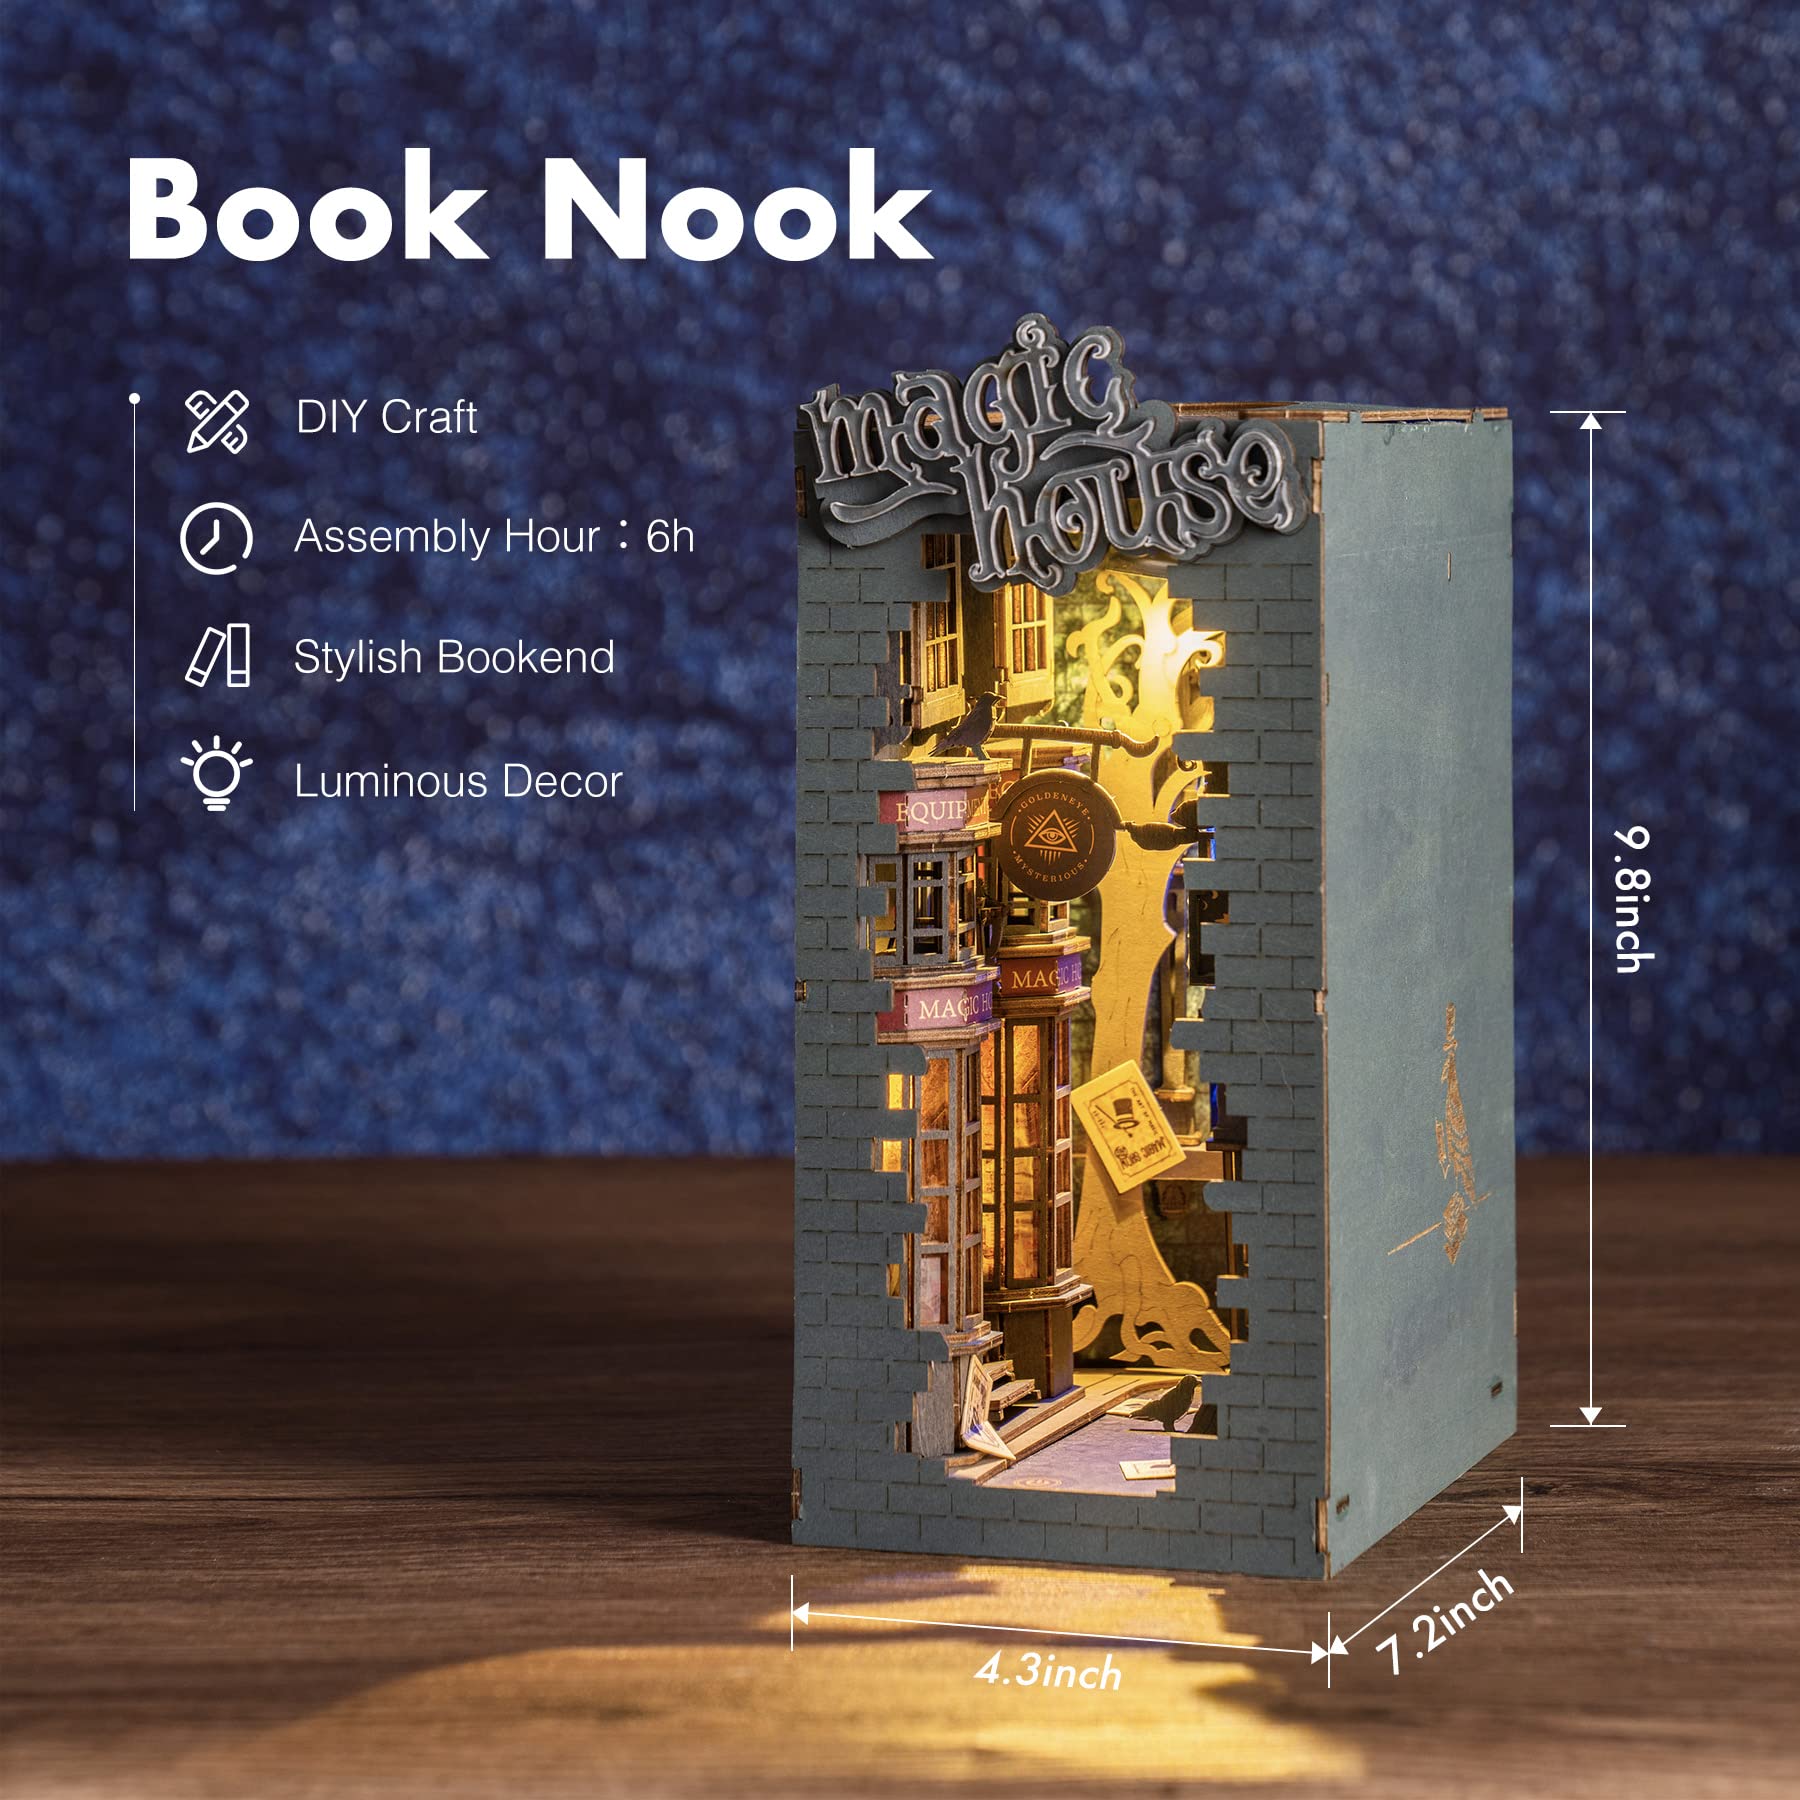 ROBOTIME DIY Book Nook Kit Insert Bookcase Book Stand 3D Wooden Puzzle DIY Miniature House Wood Bookends Book Nook Model Building Kit with LED Light Booknook Decoration